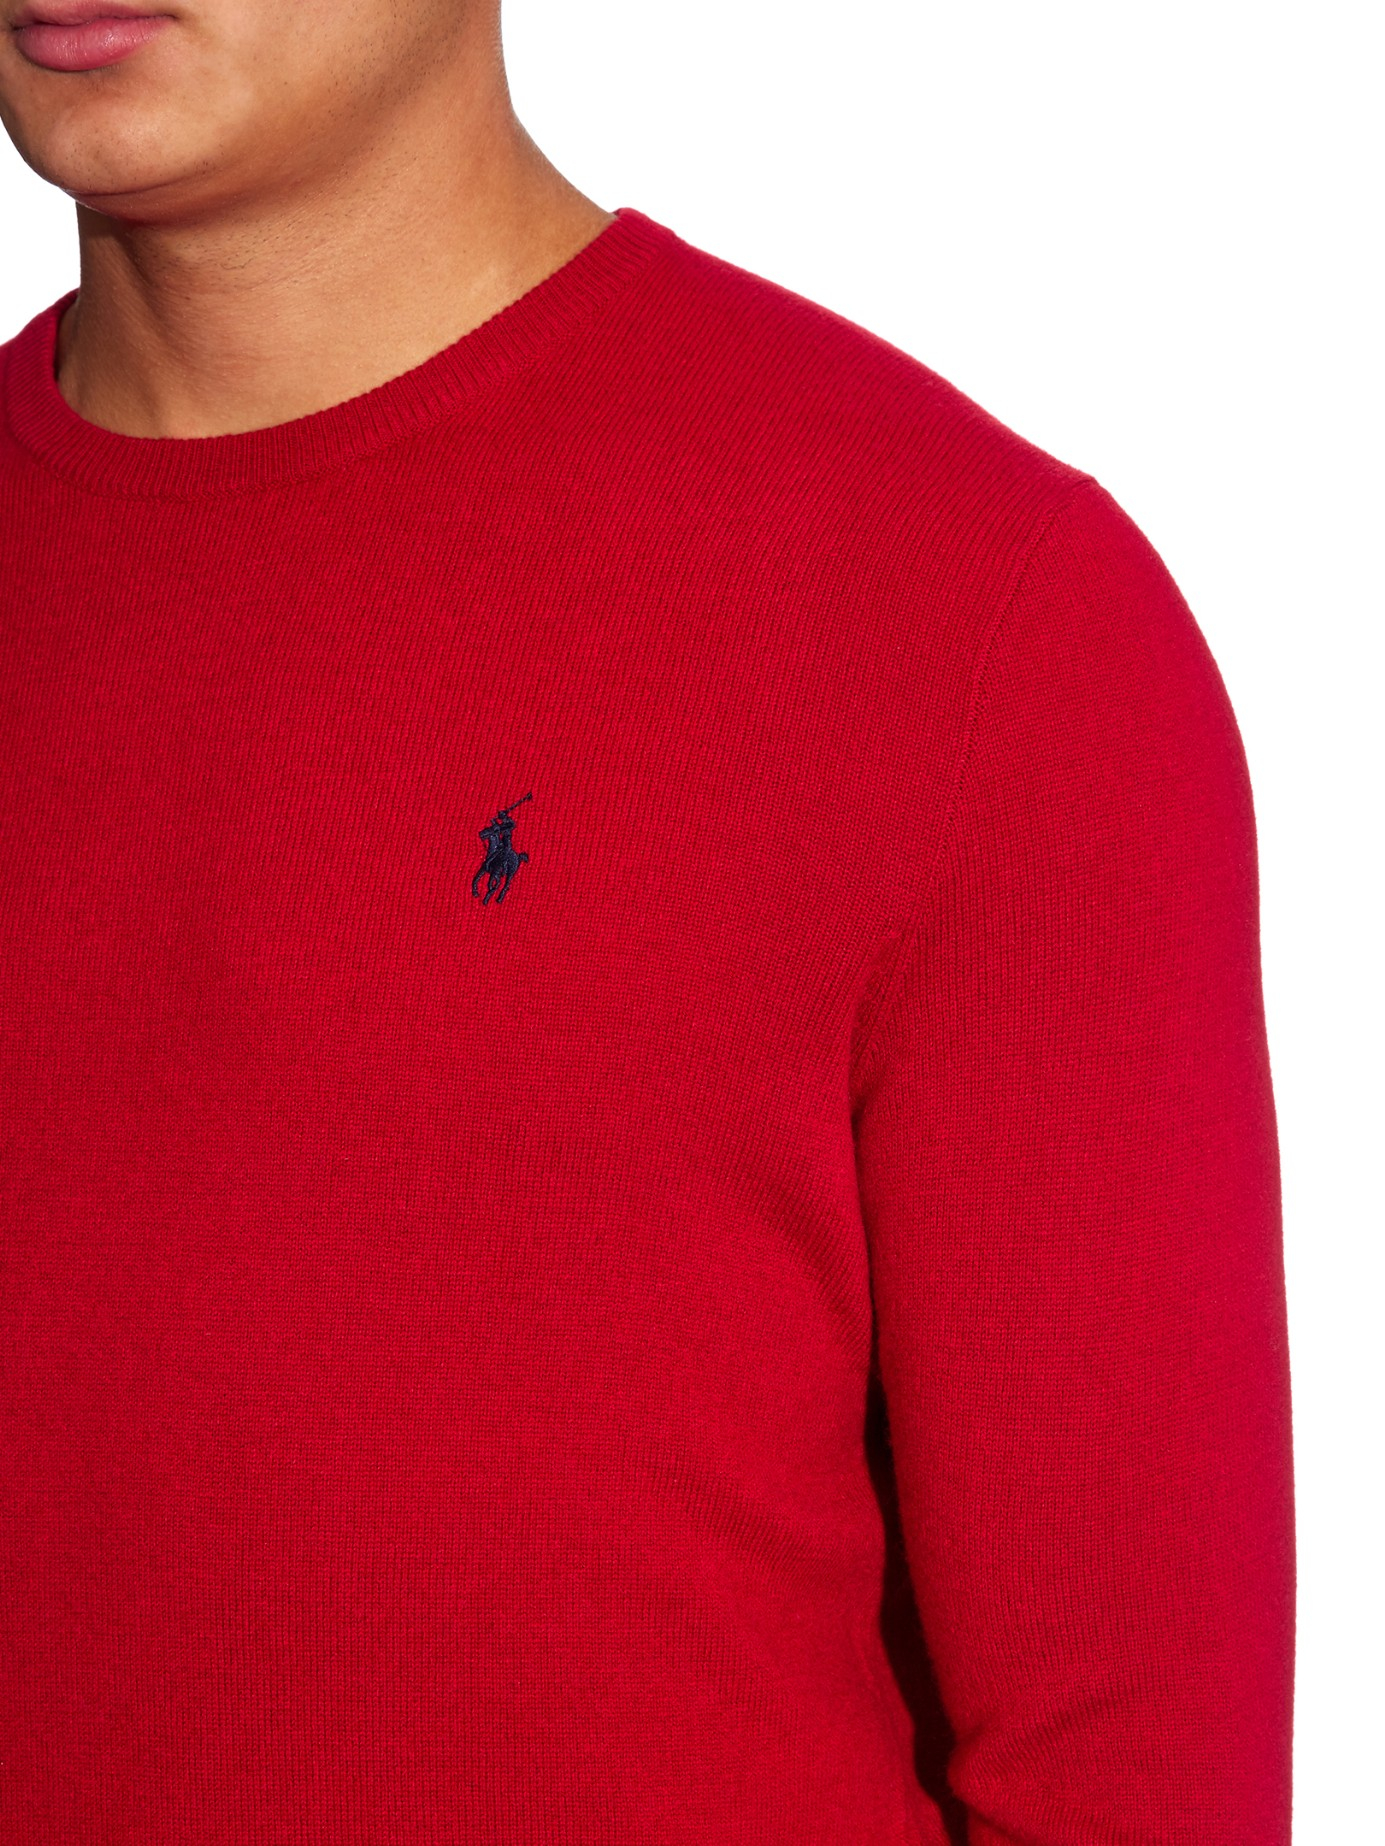 Polo ralph lauren Crew-neck Long-sleeved Wool Sweater in Red for Men | Lyst